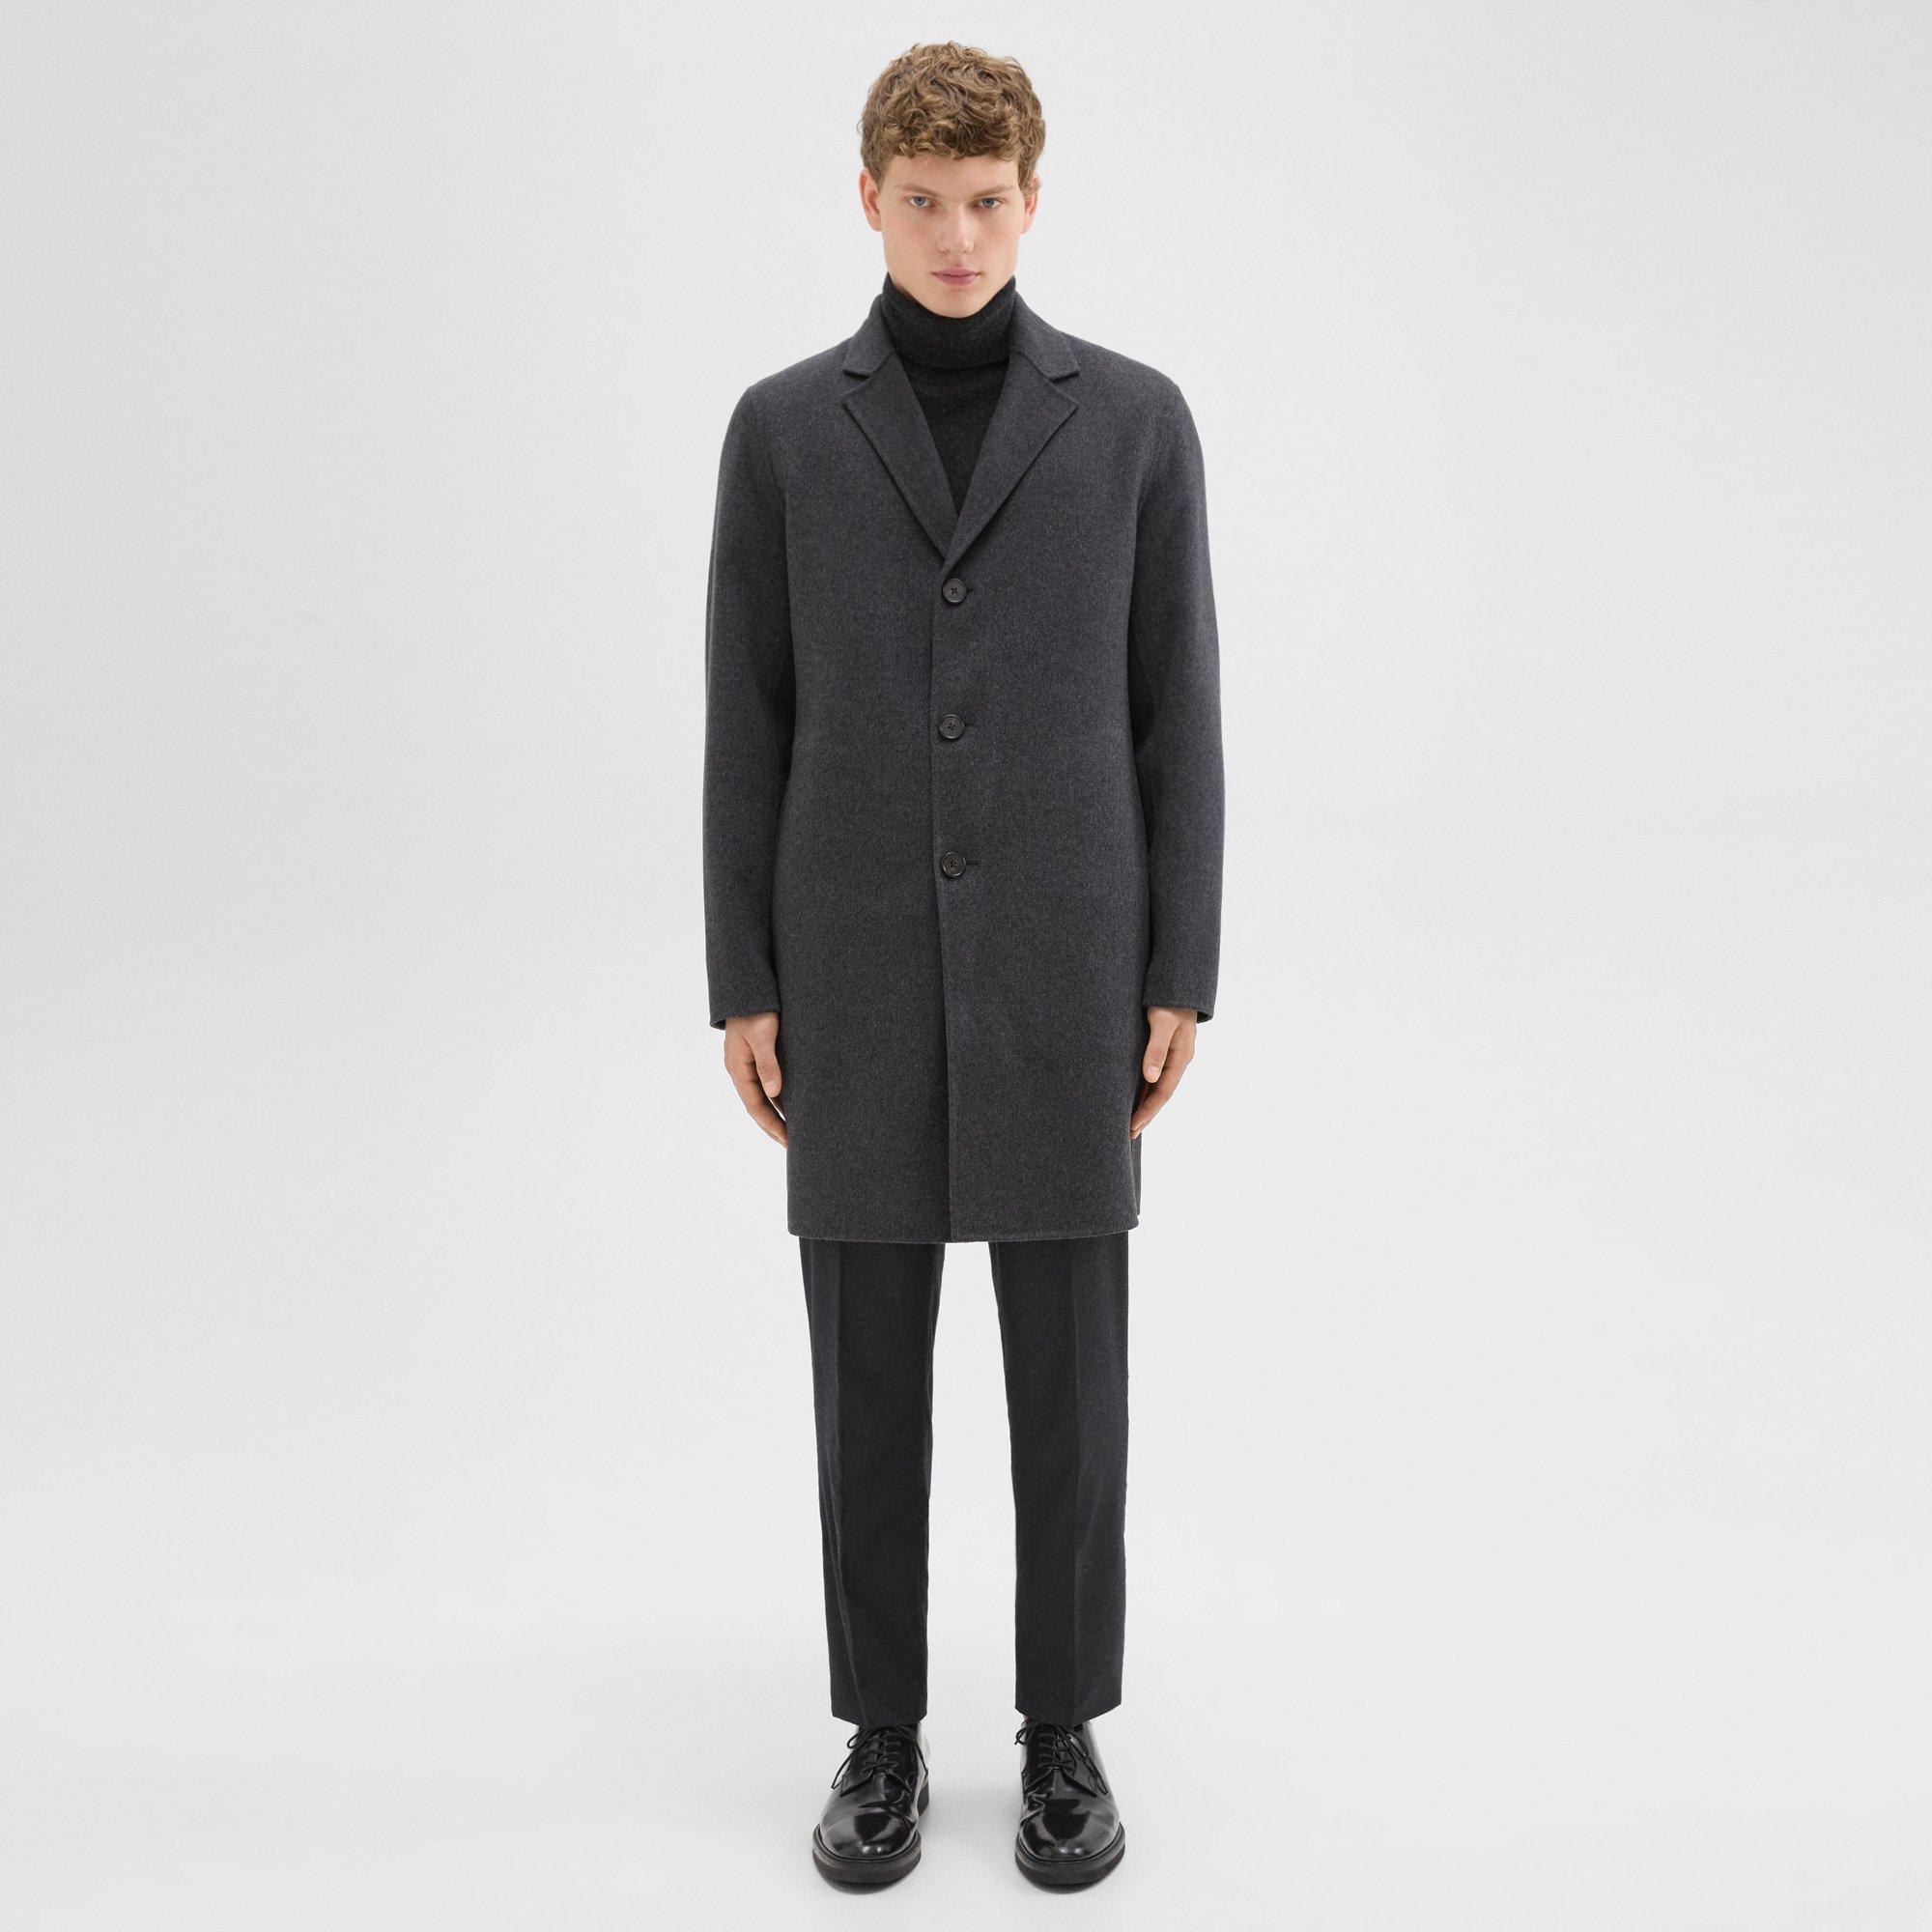 Theory Almec Coat in Double-Face Wool-Cashmere